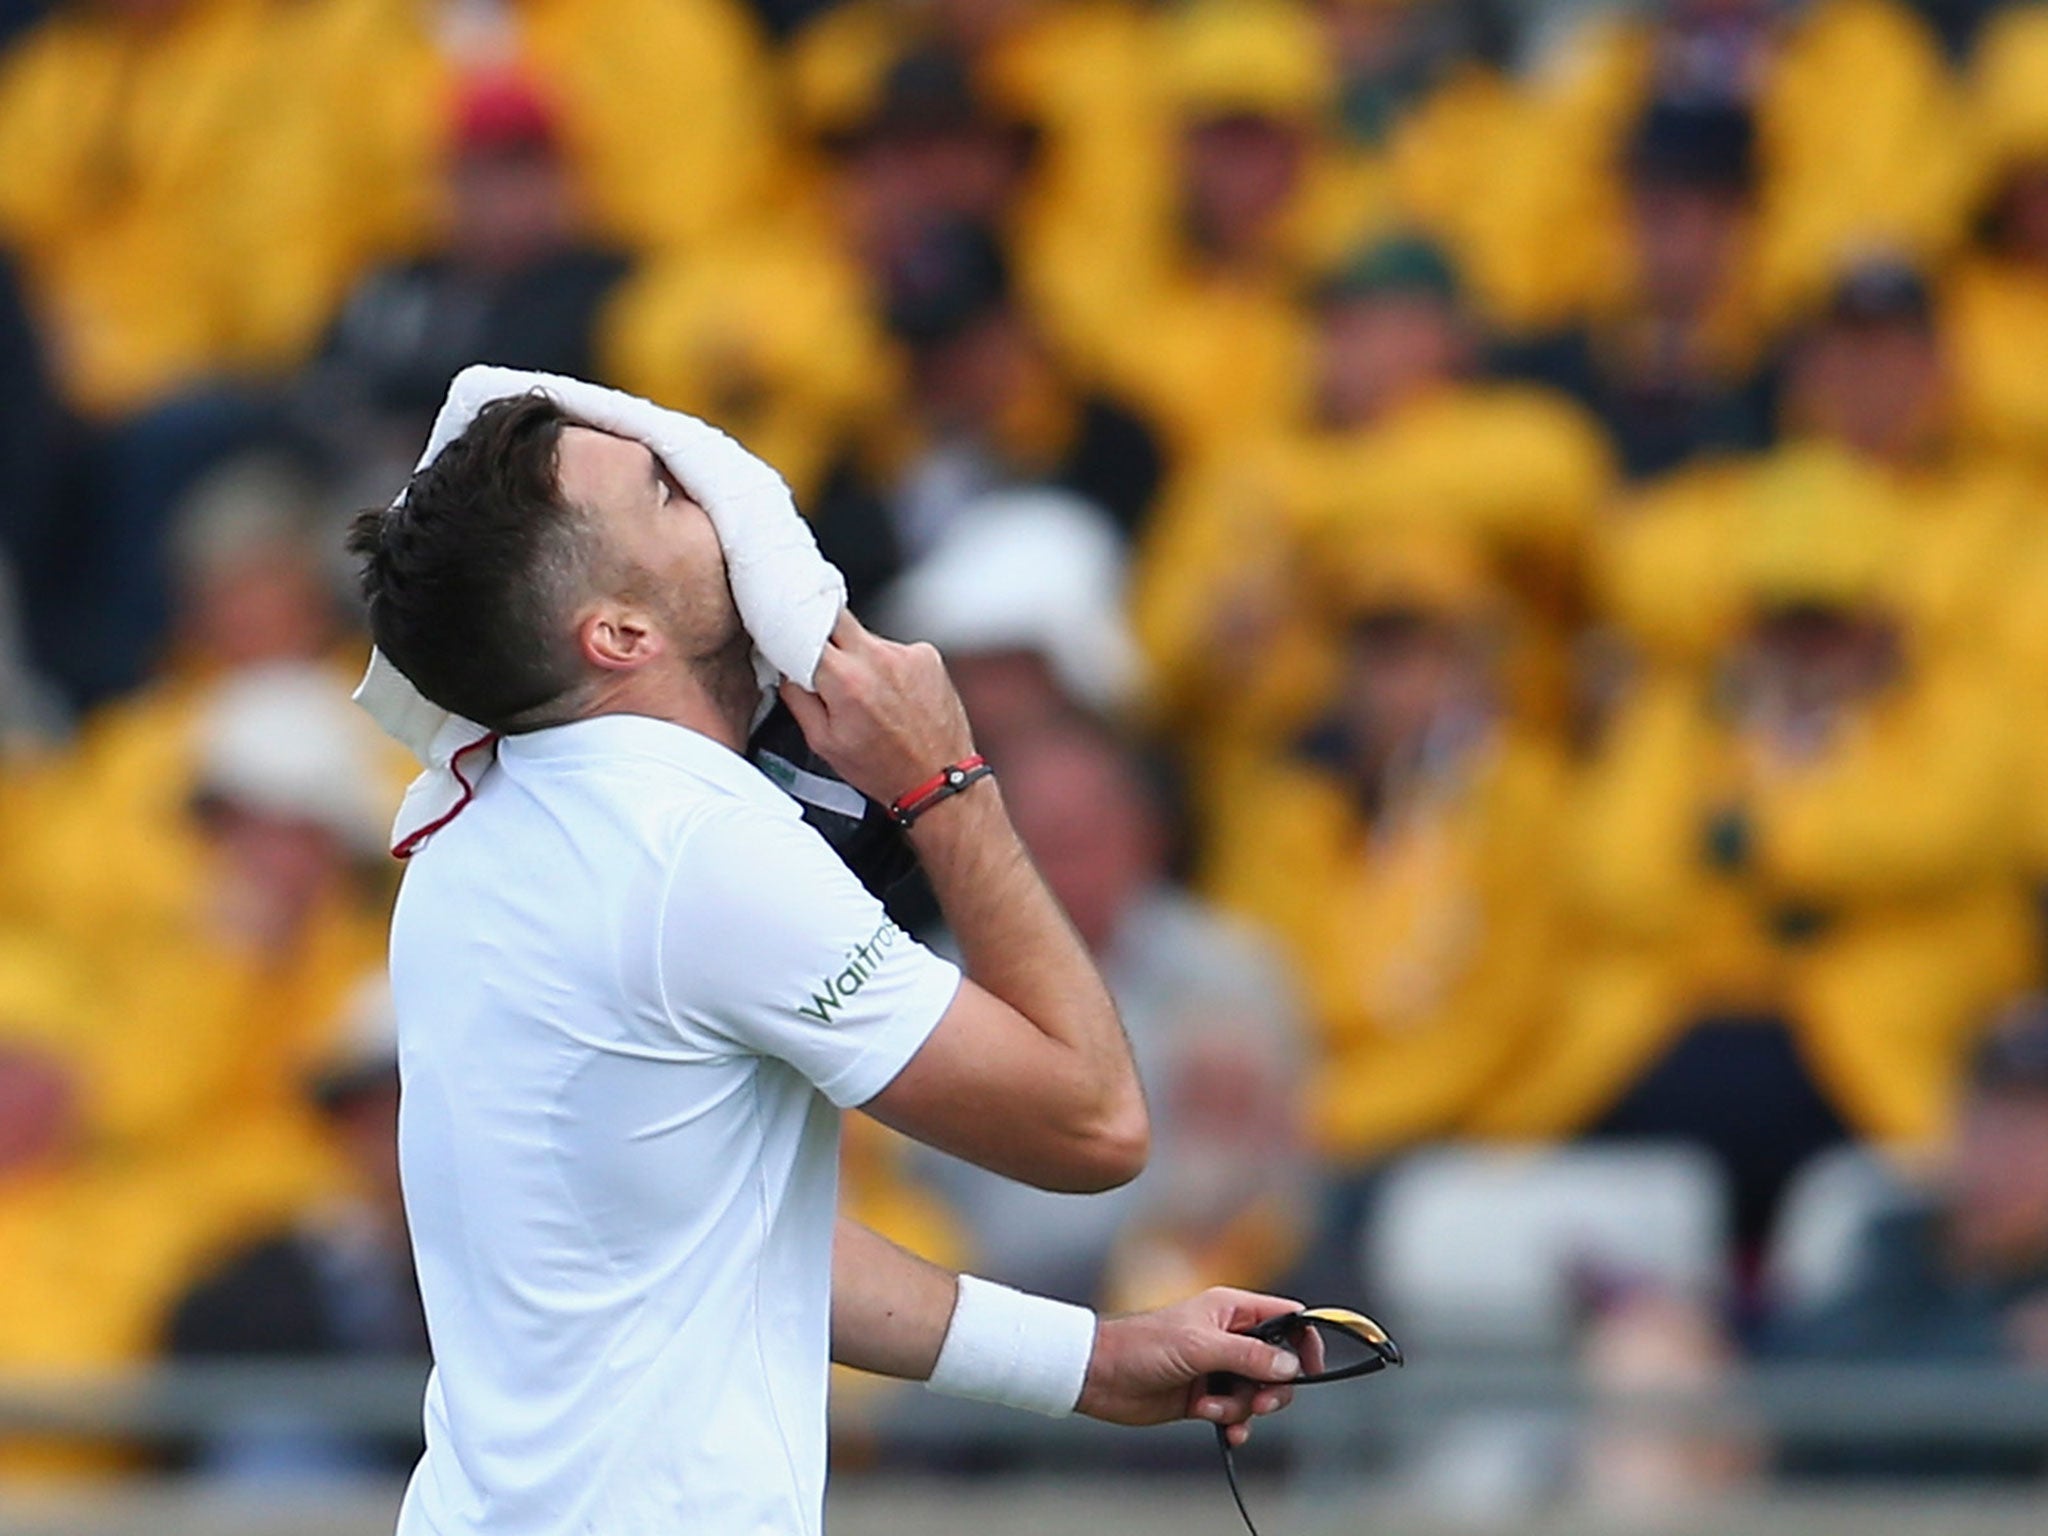 James Anderson will miss the Fourth Test